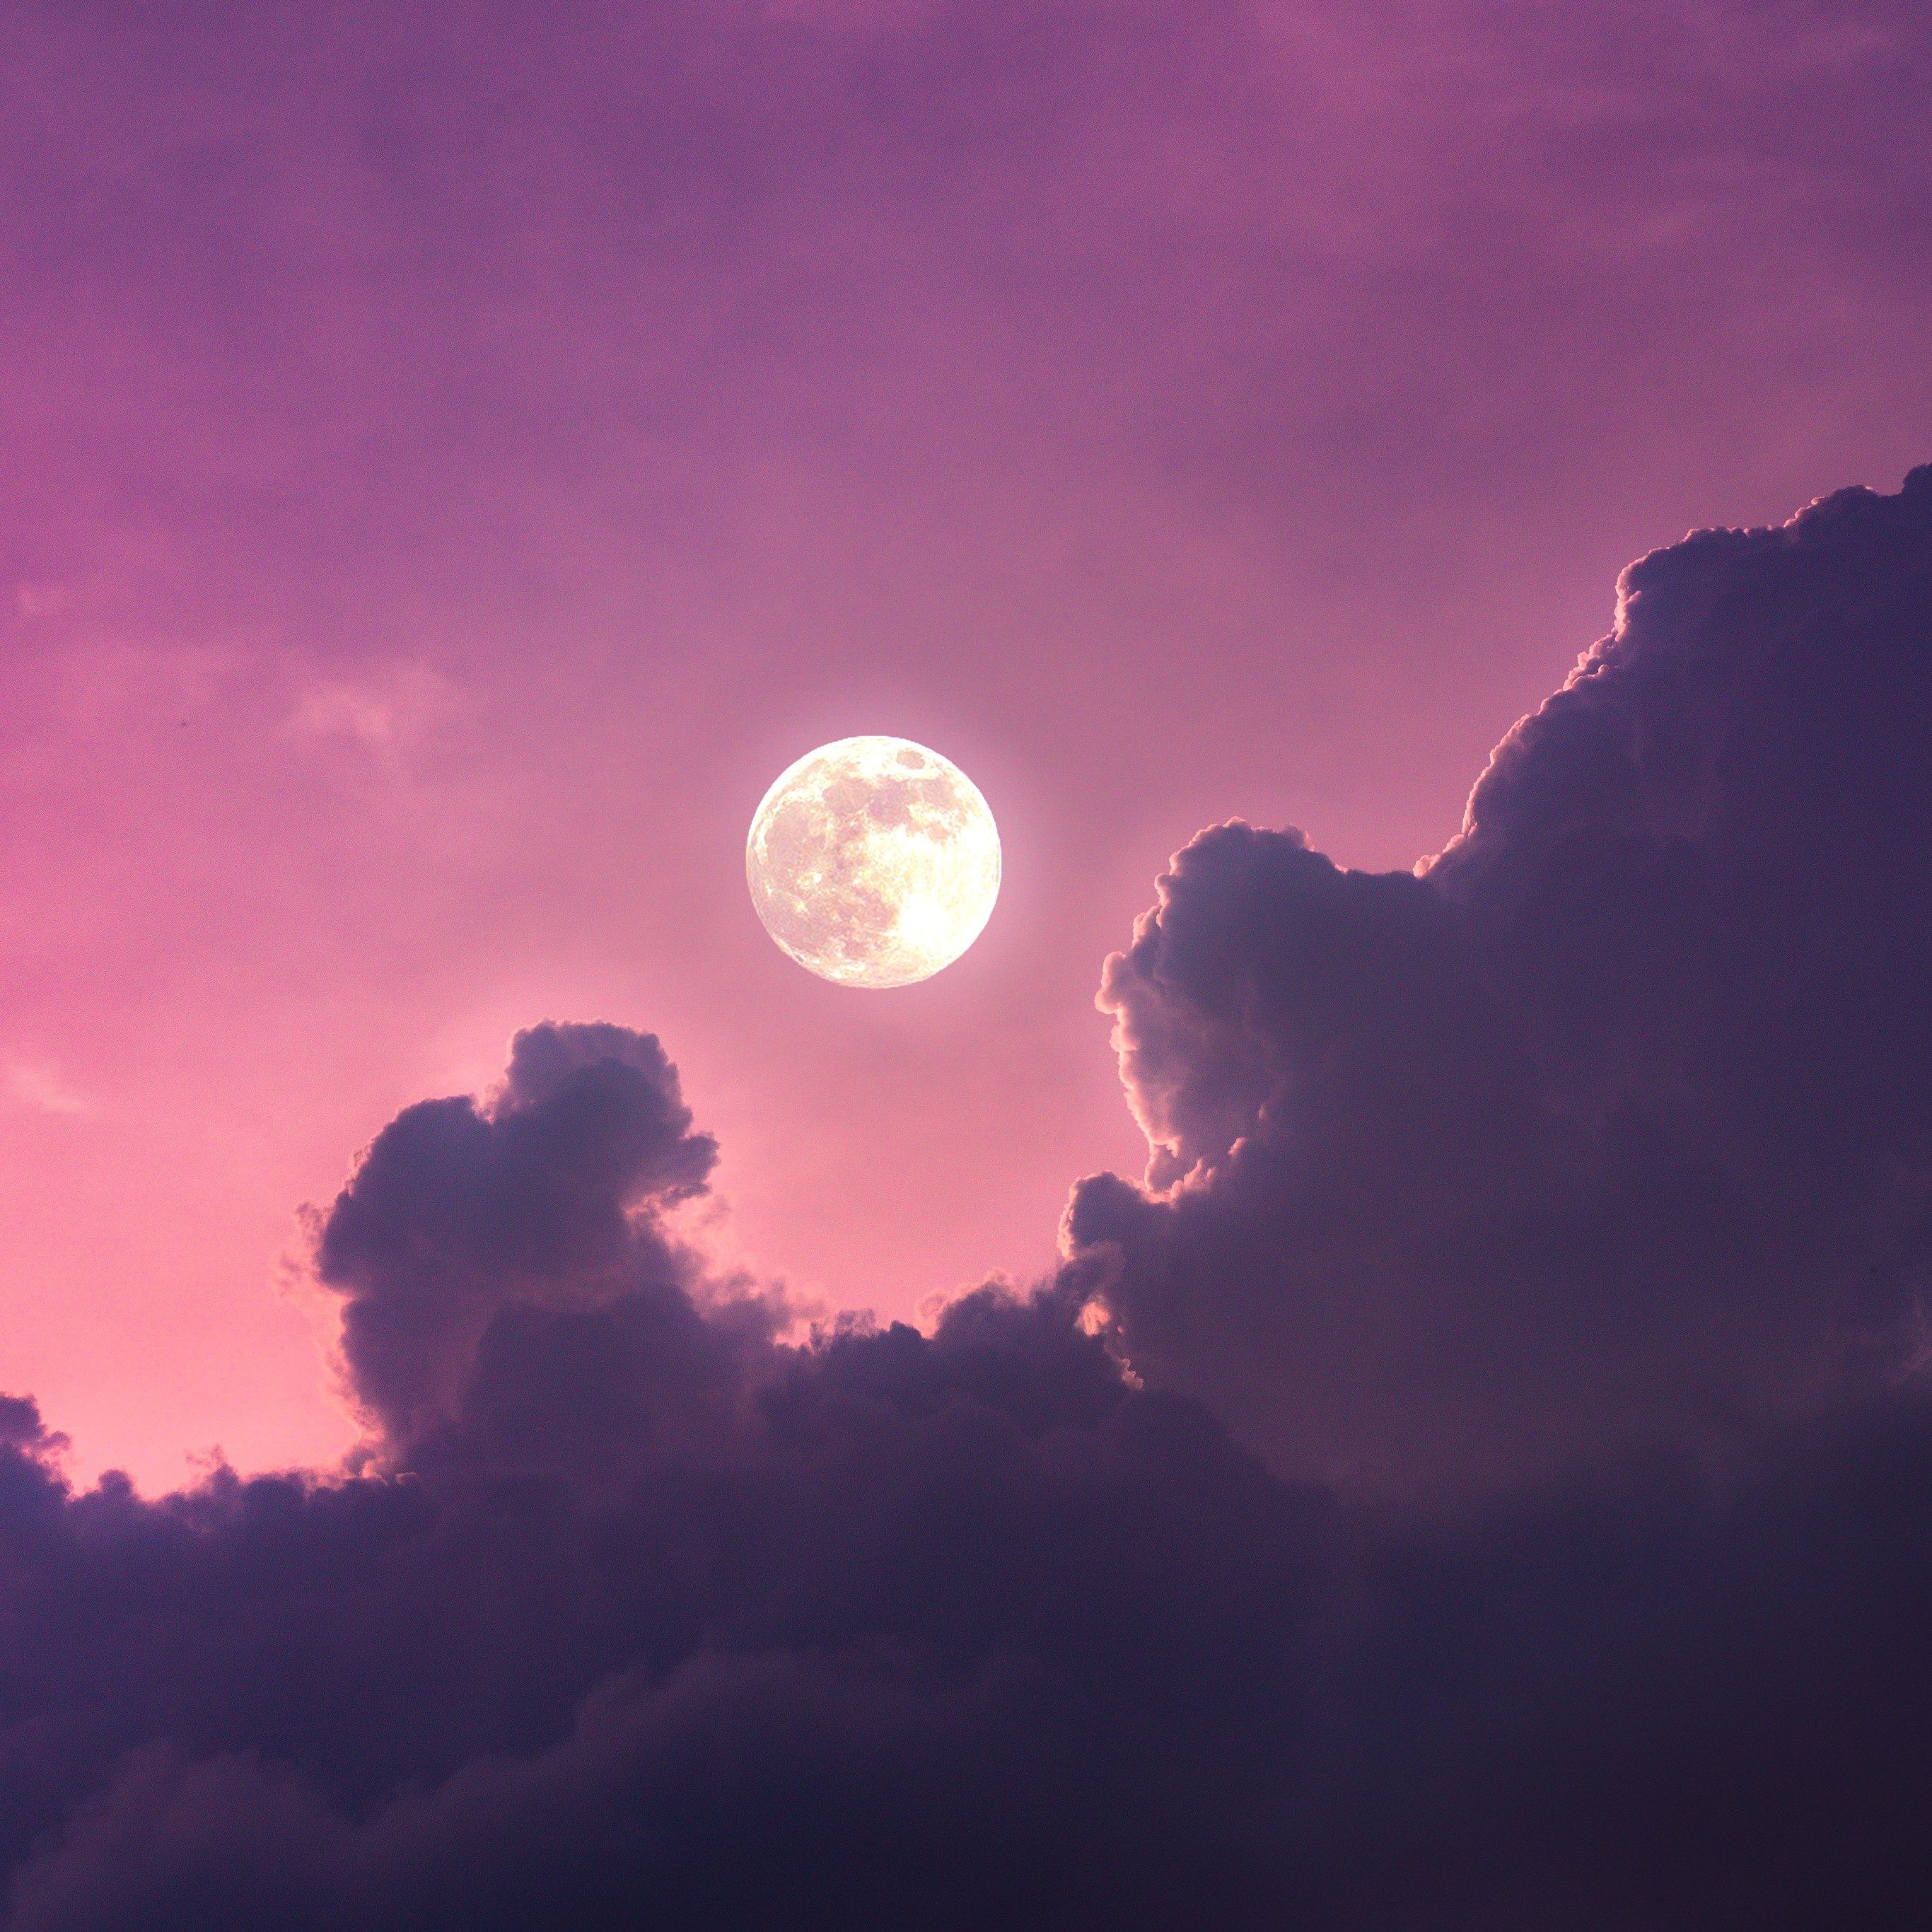 A full moon is in the sky with clouds - Moon, light pink, pink, cloud, sky